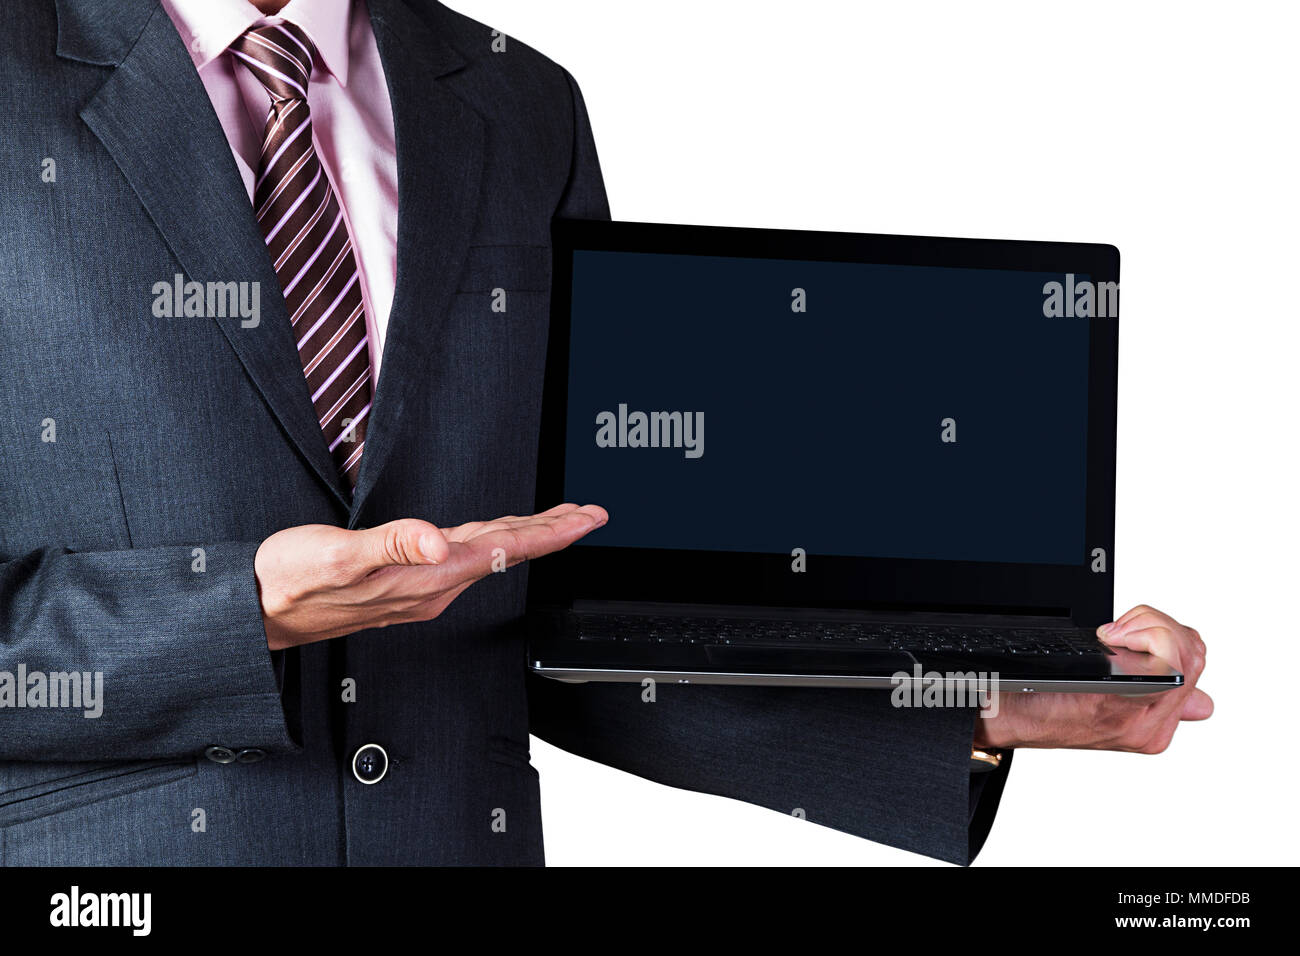 Portrait of a male executive presenting new laptop Close-Up Stock Photo